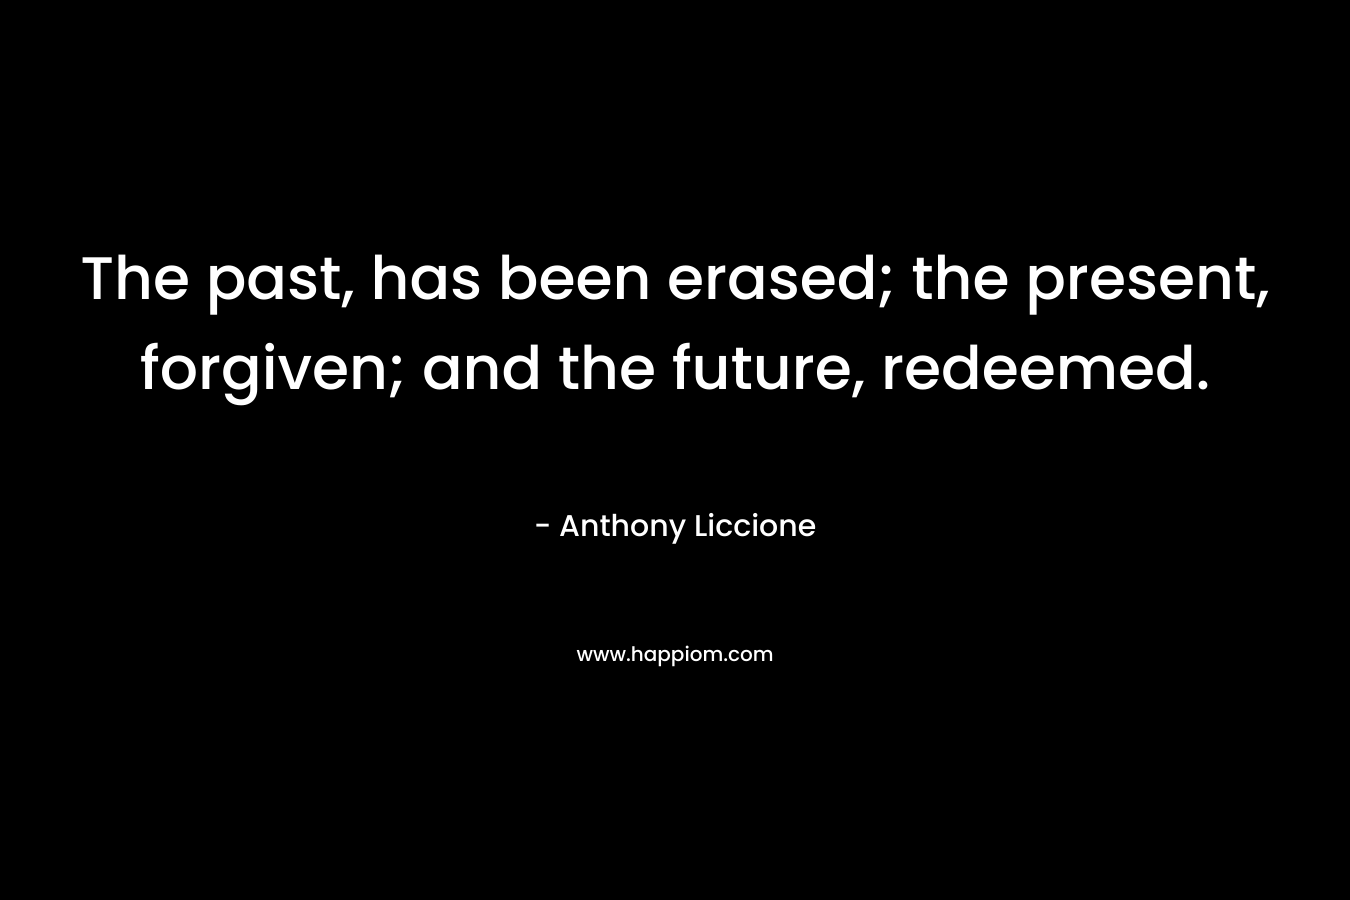 The past, has been erased; the present, forgiven; and the future, redeemed.